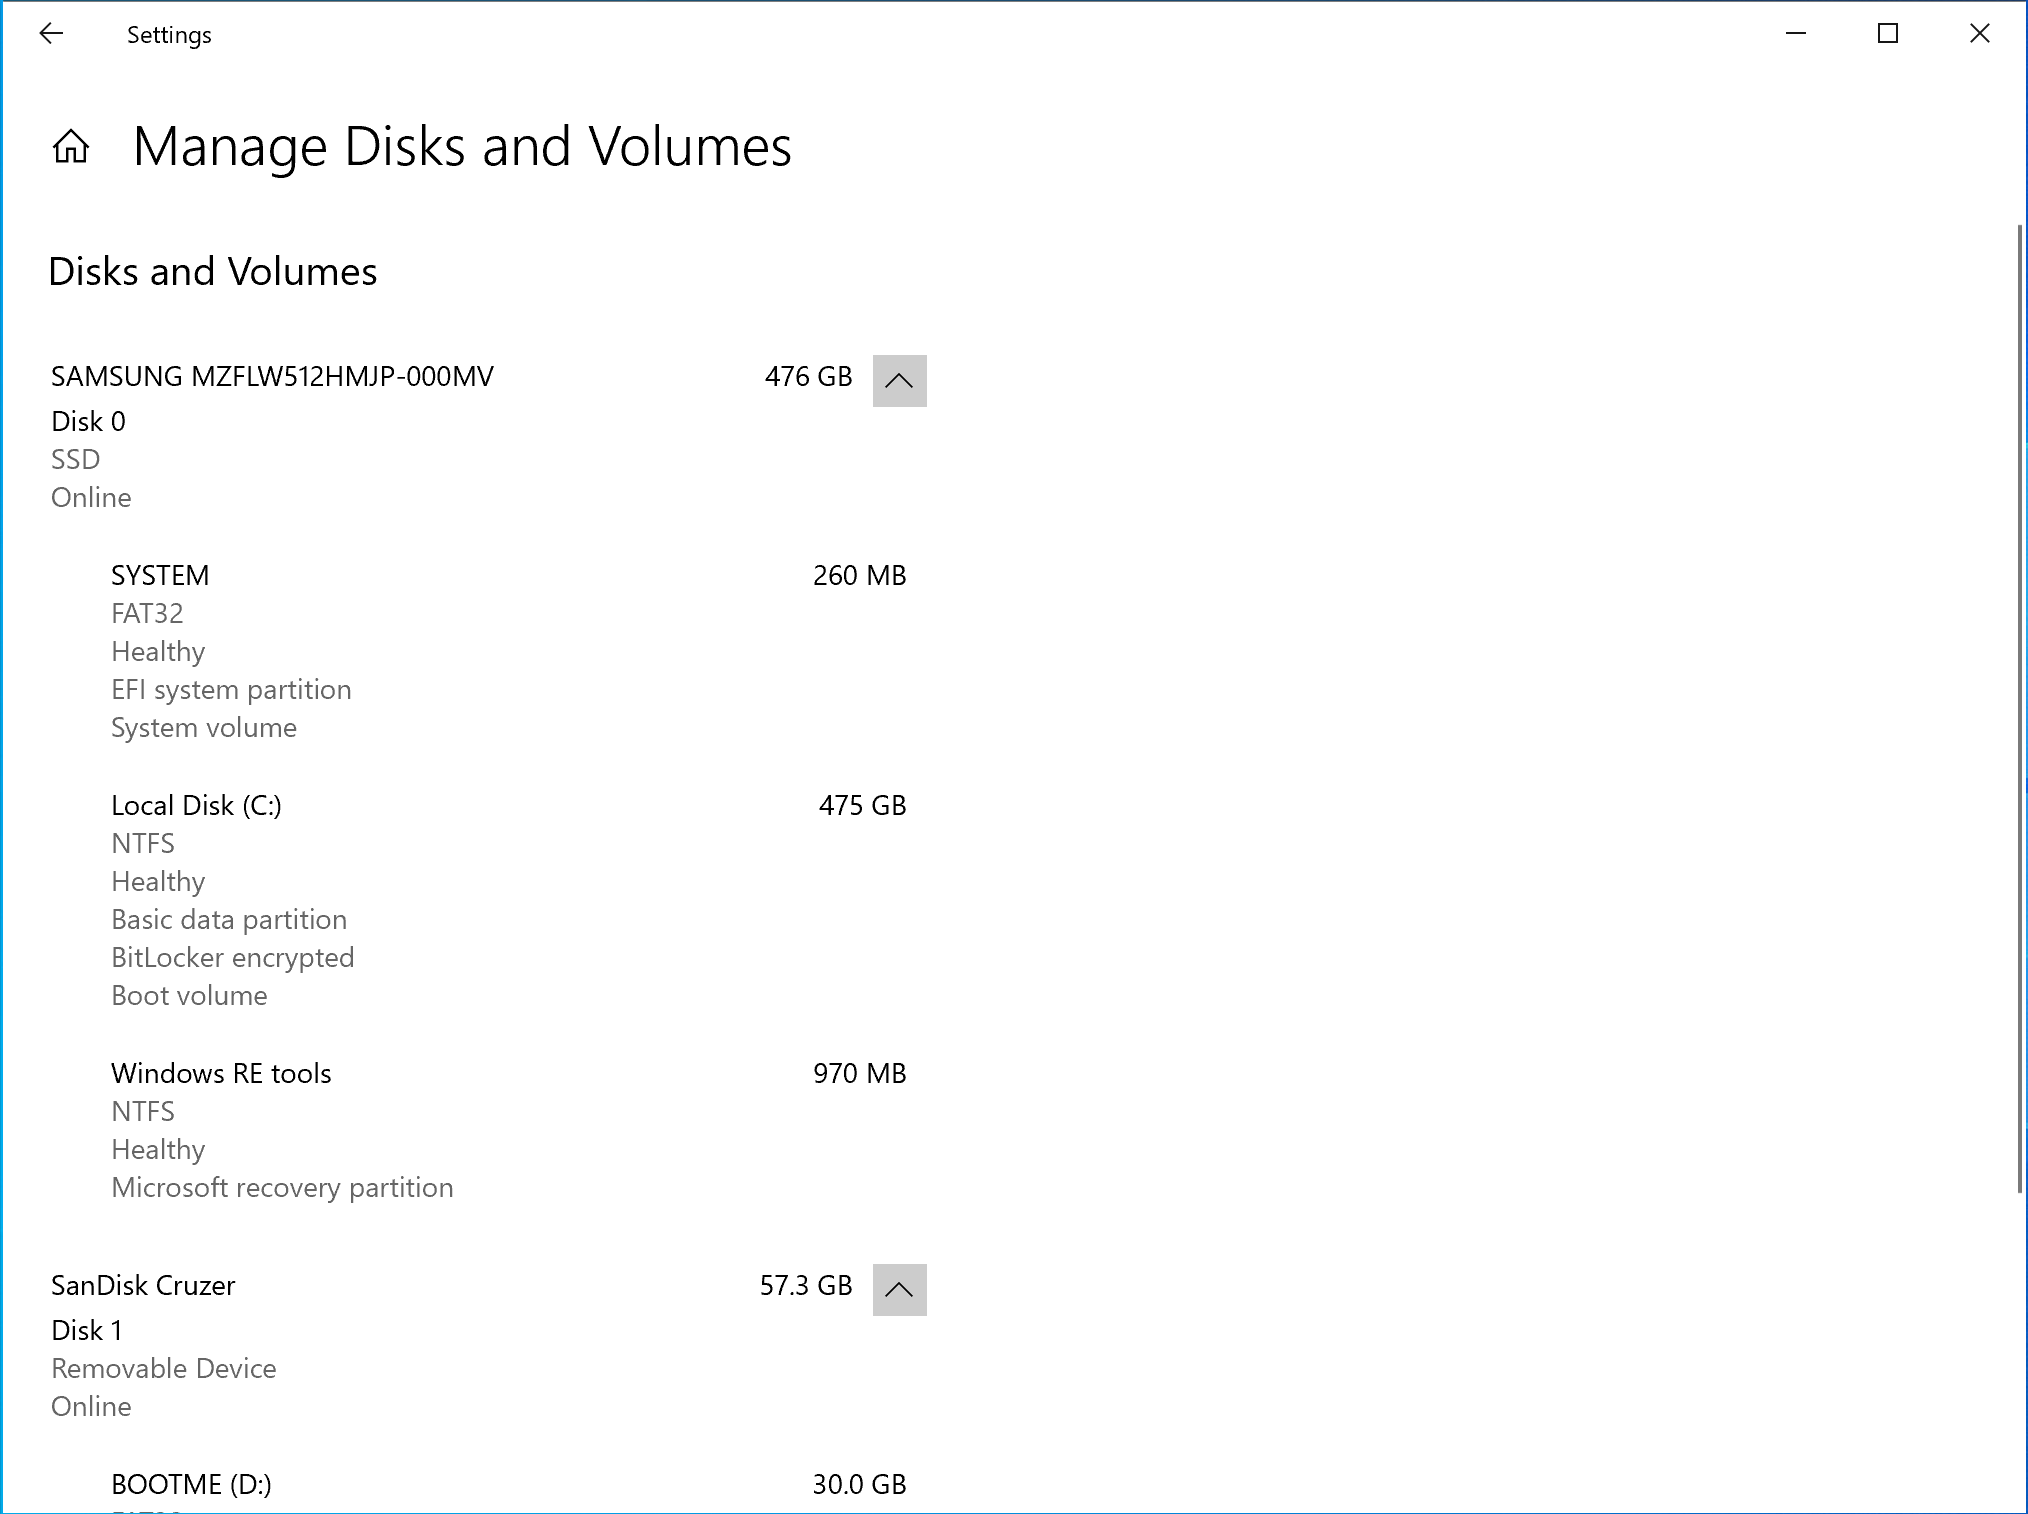 The Manage Disks and Volumes page in Settings. C drive is selected and shows Explorer and Properties options.